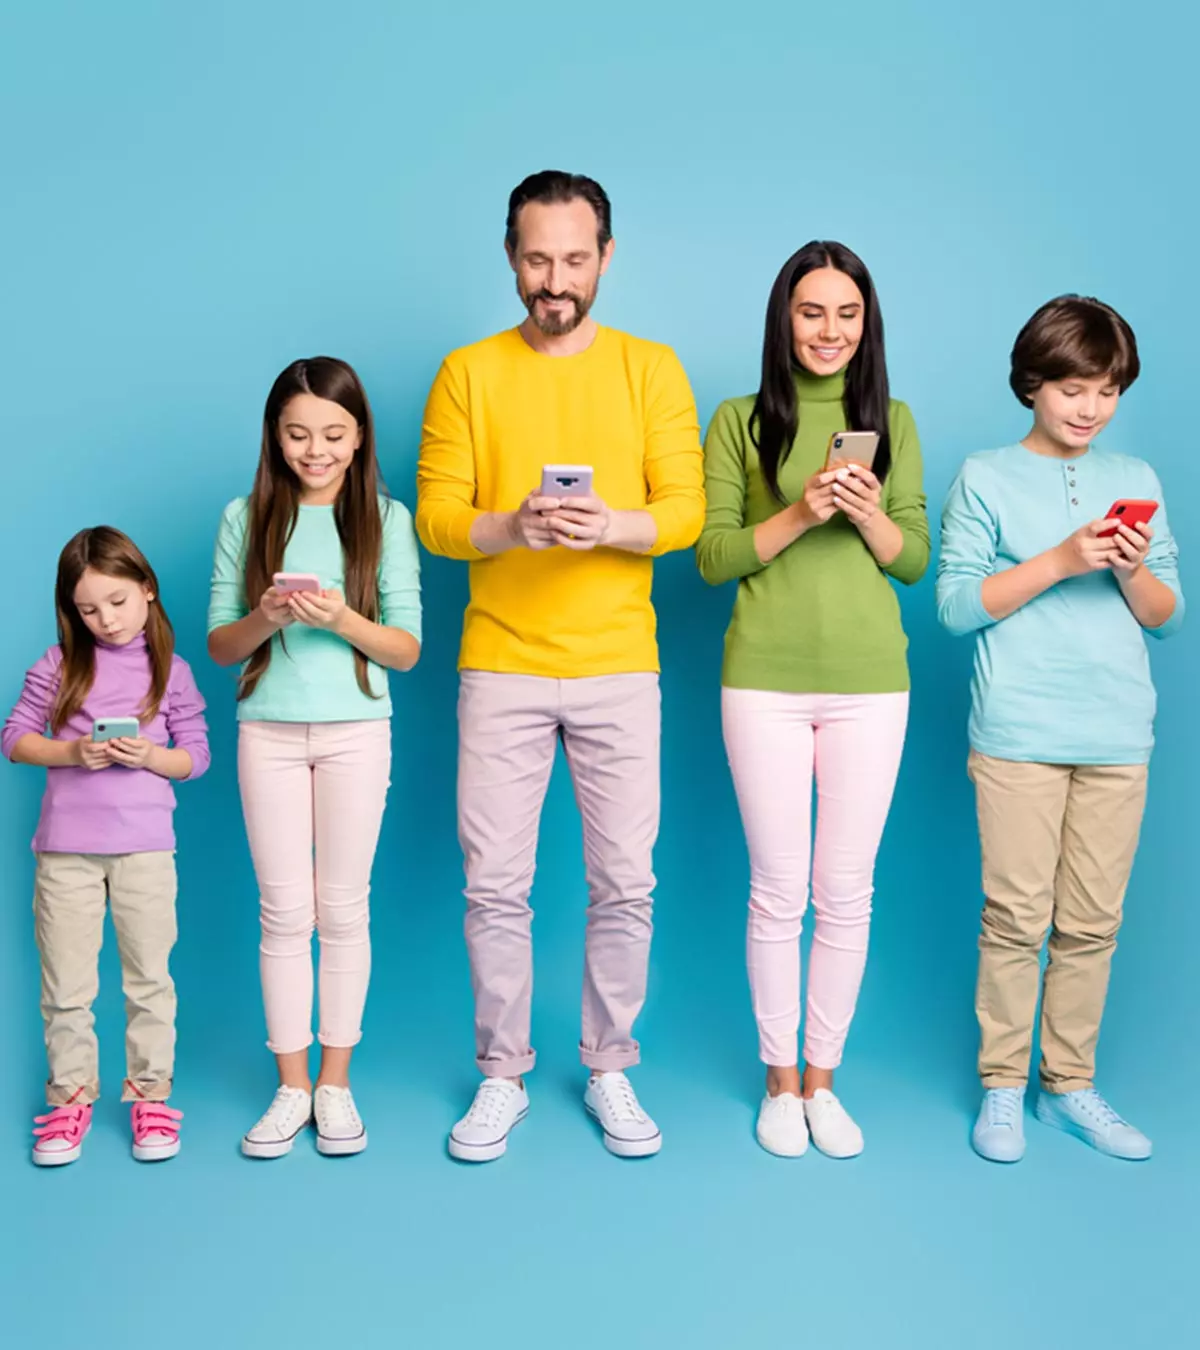 Why Too Much Cell Phone Usage Can Hurt Your Family Relationships